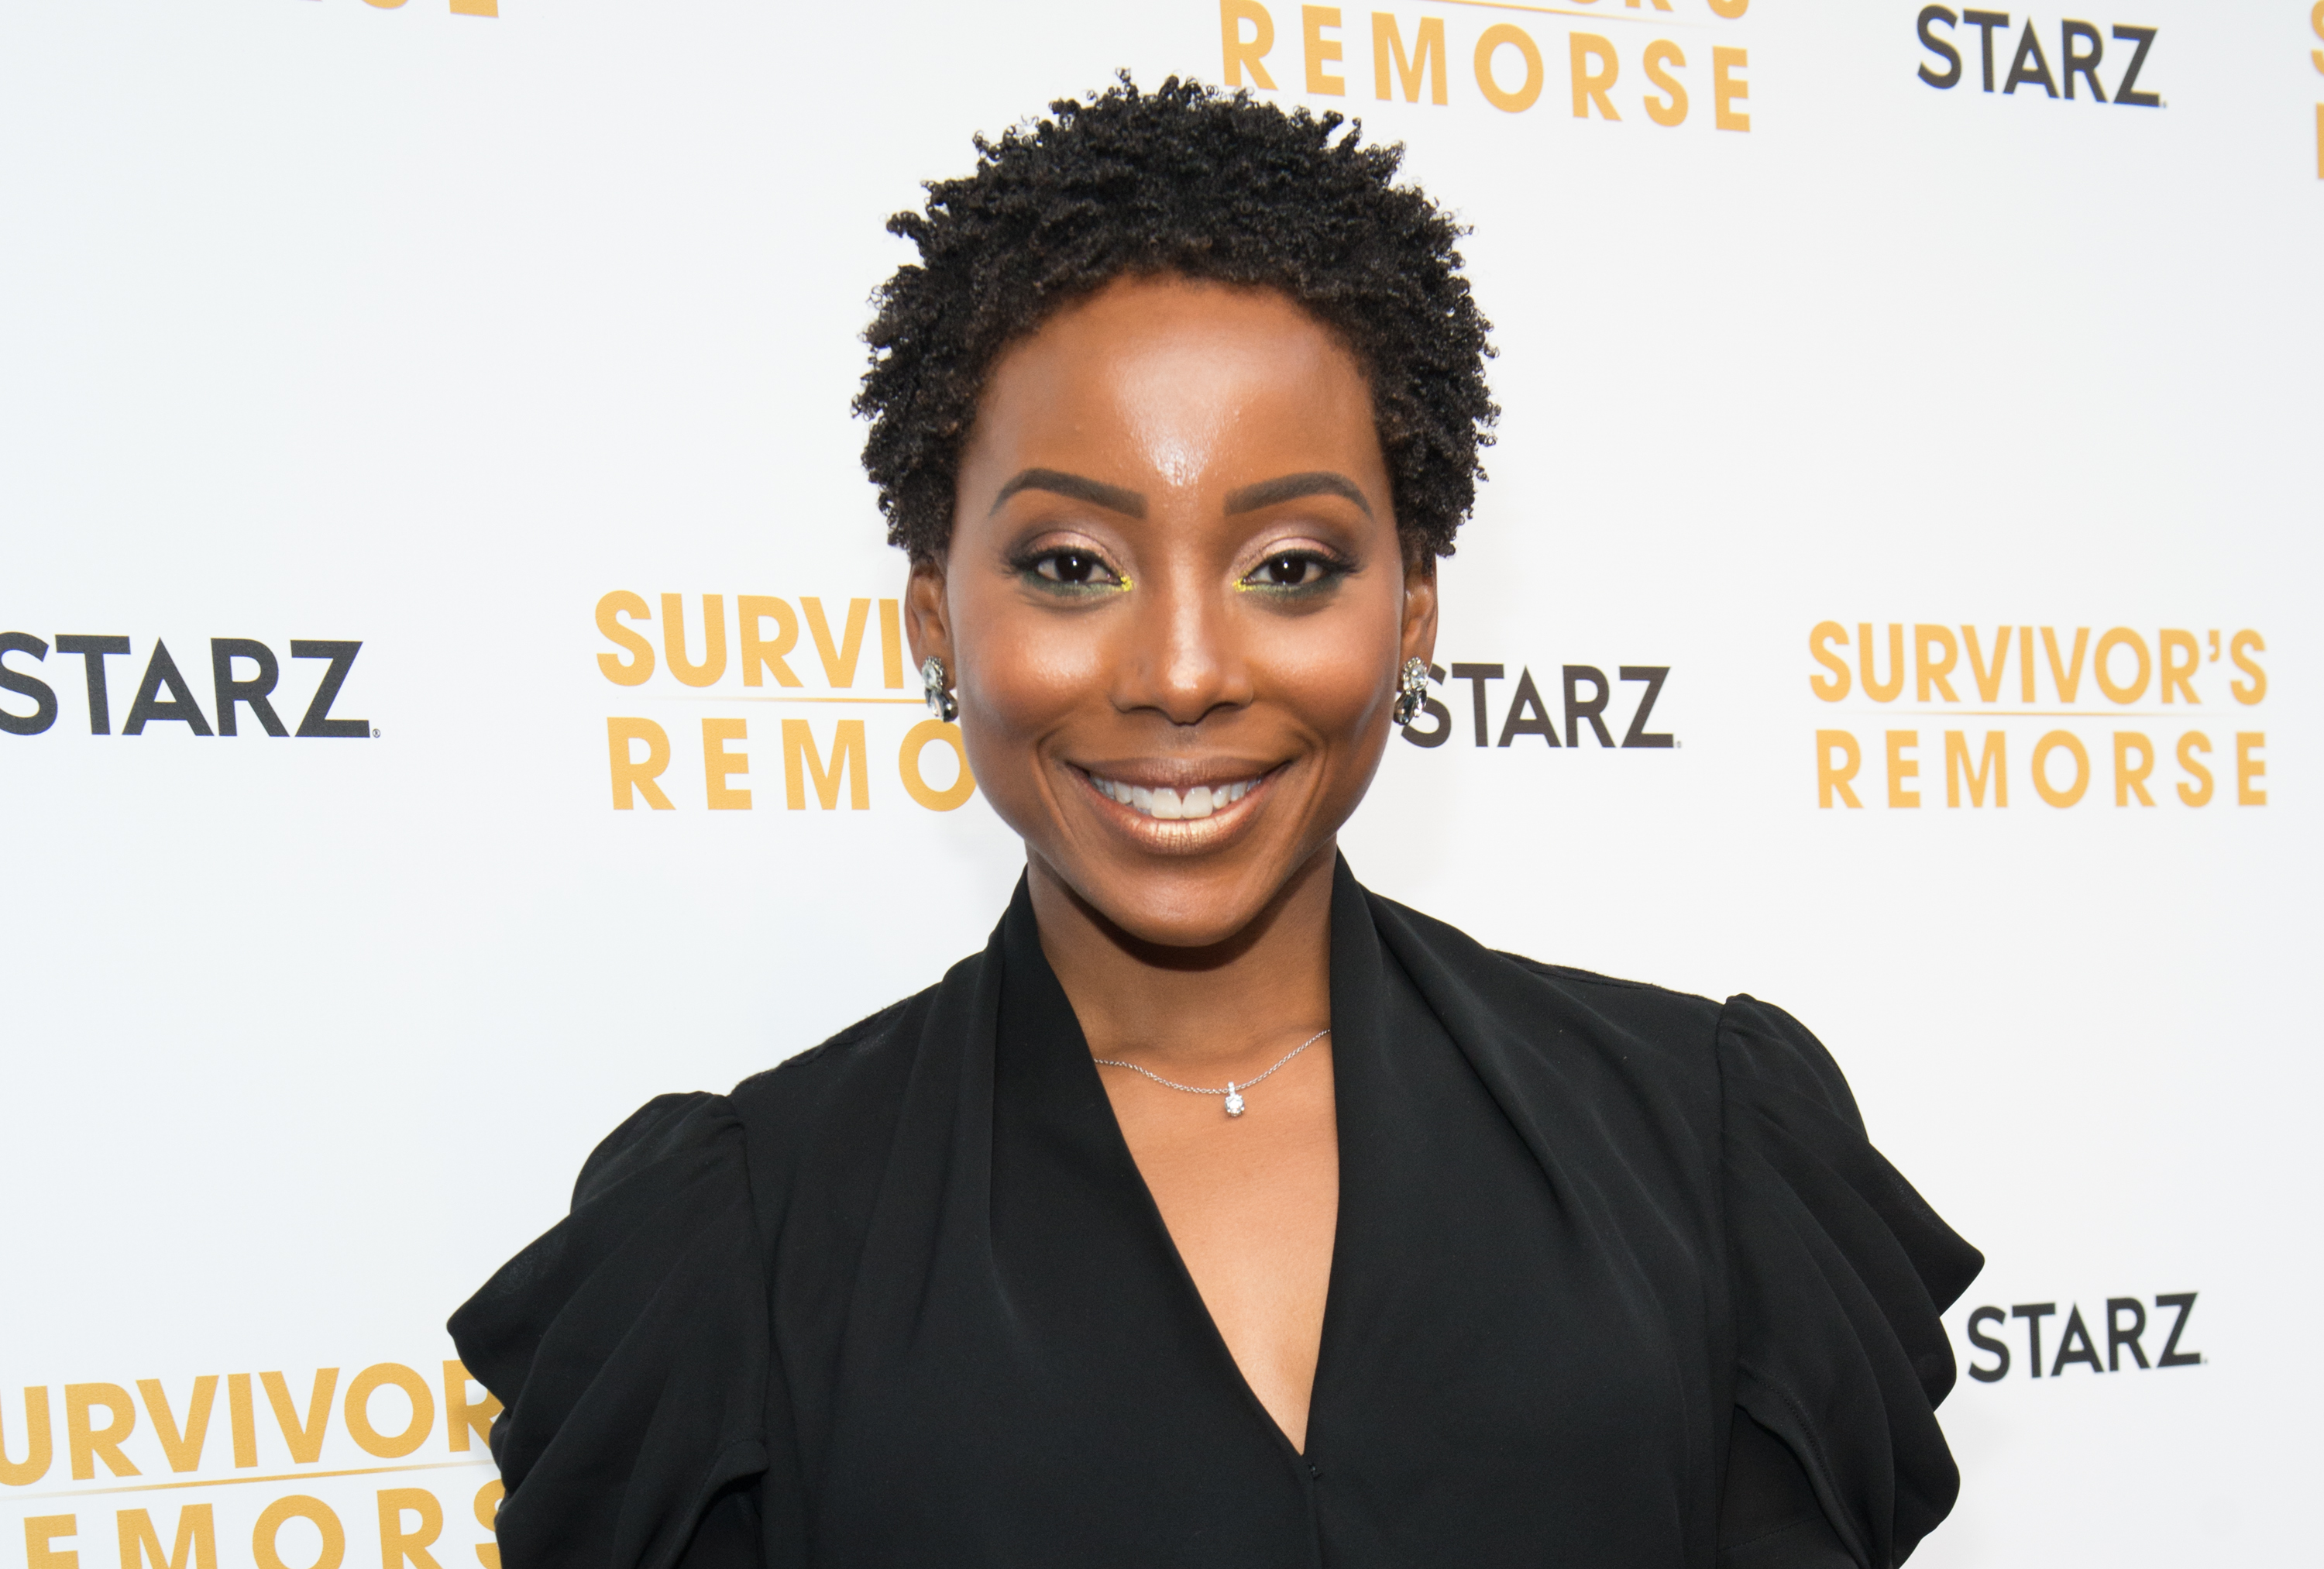 Actress Erica Ash attends Survivor’s Remorse New York screening at the Roxy Hotel in 2016